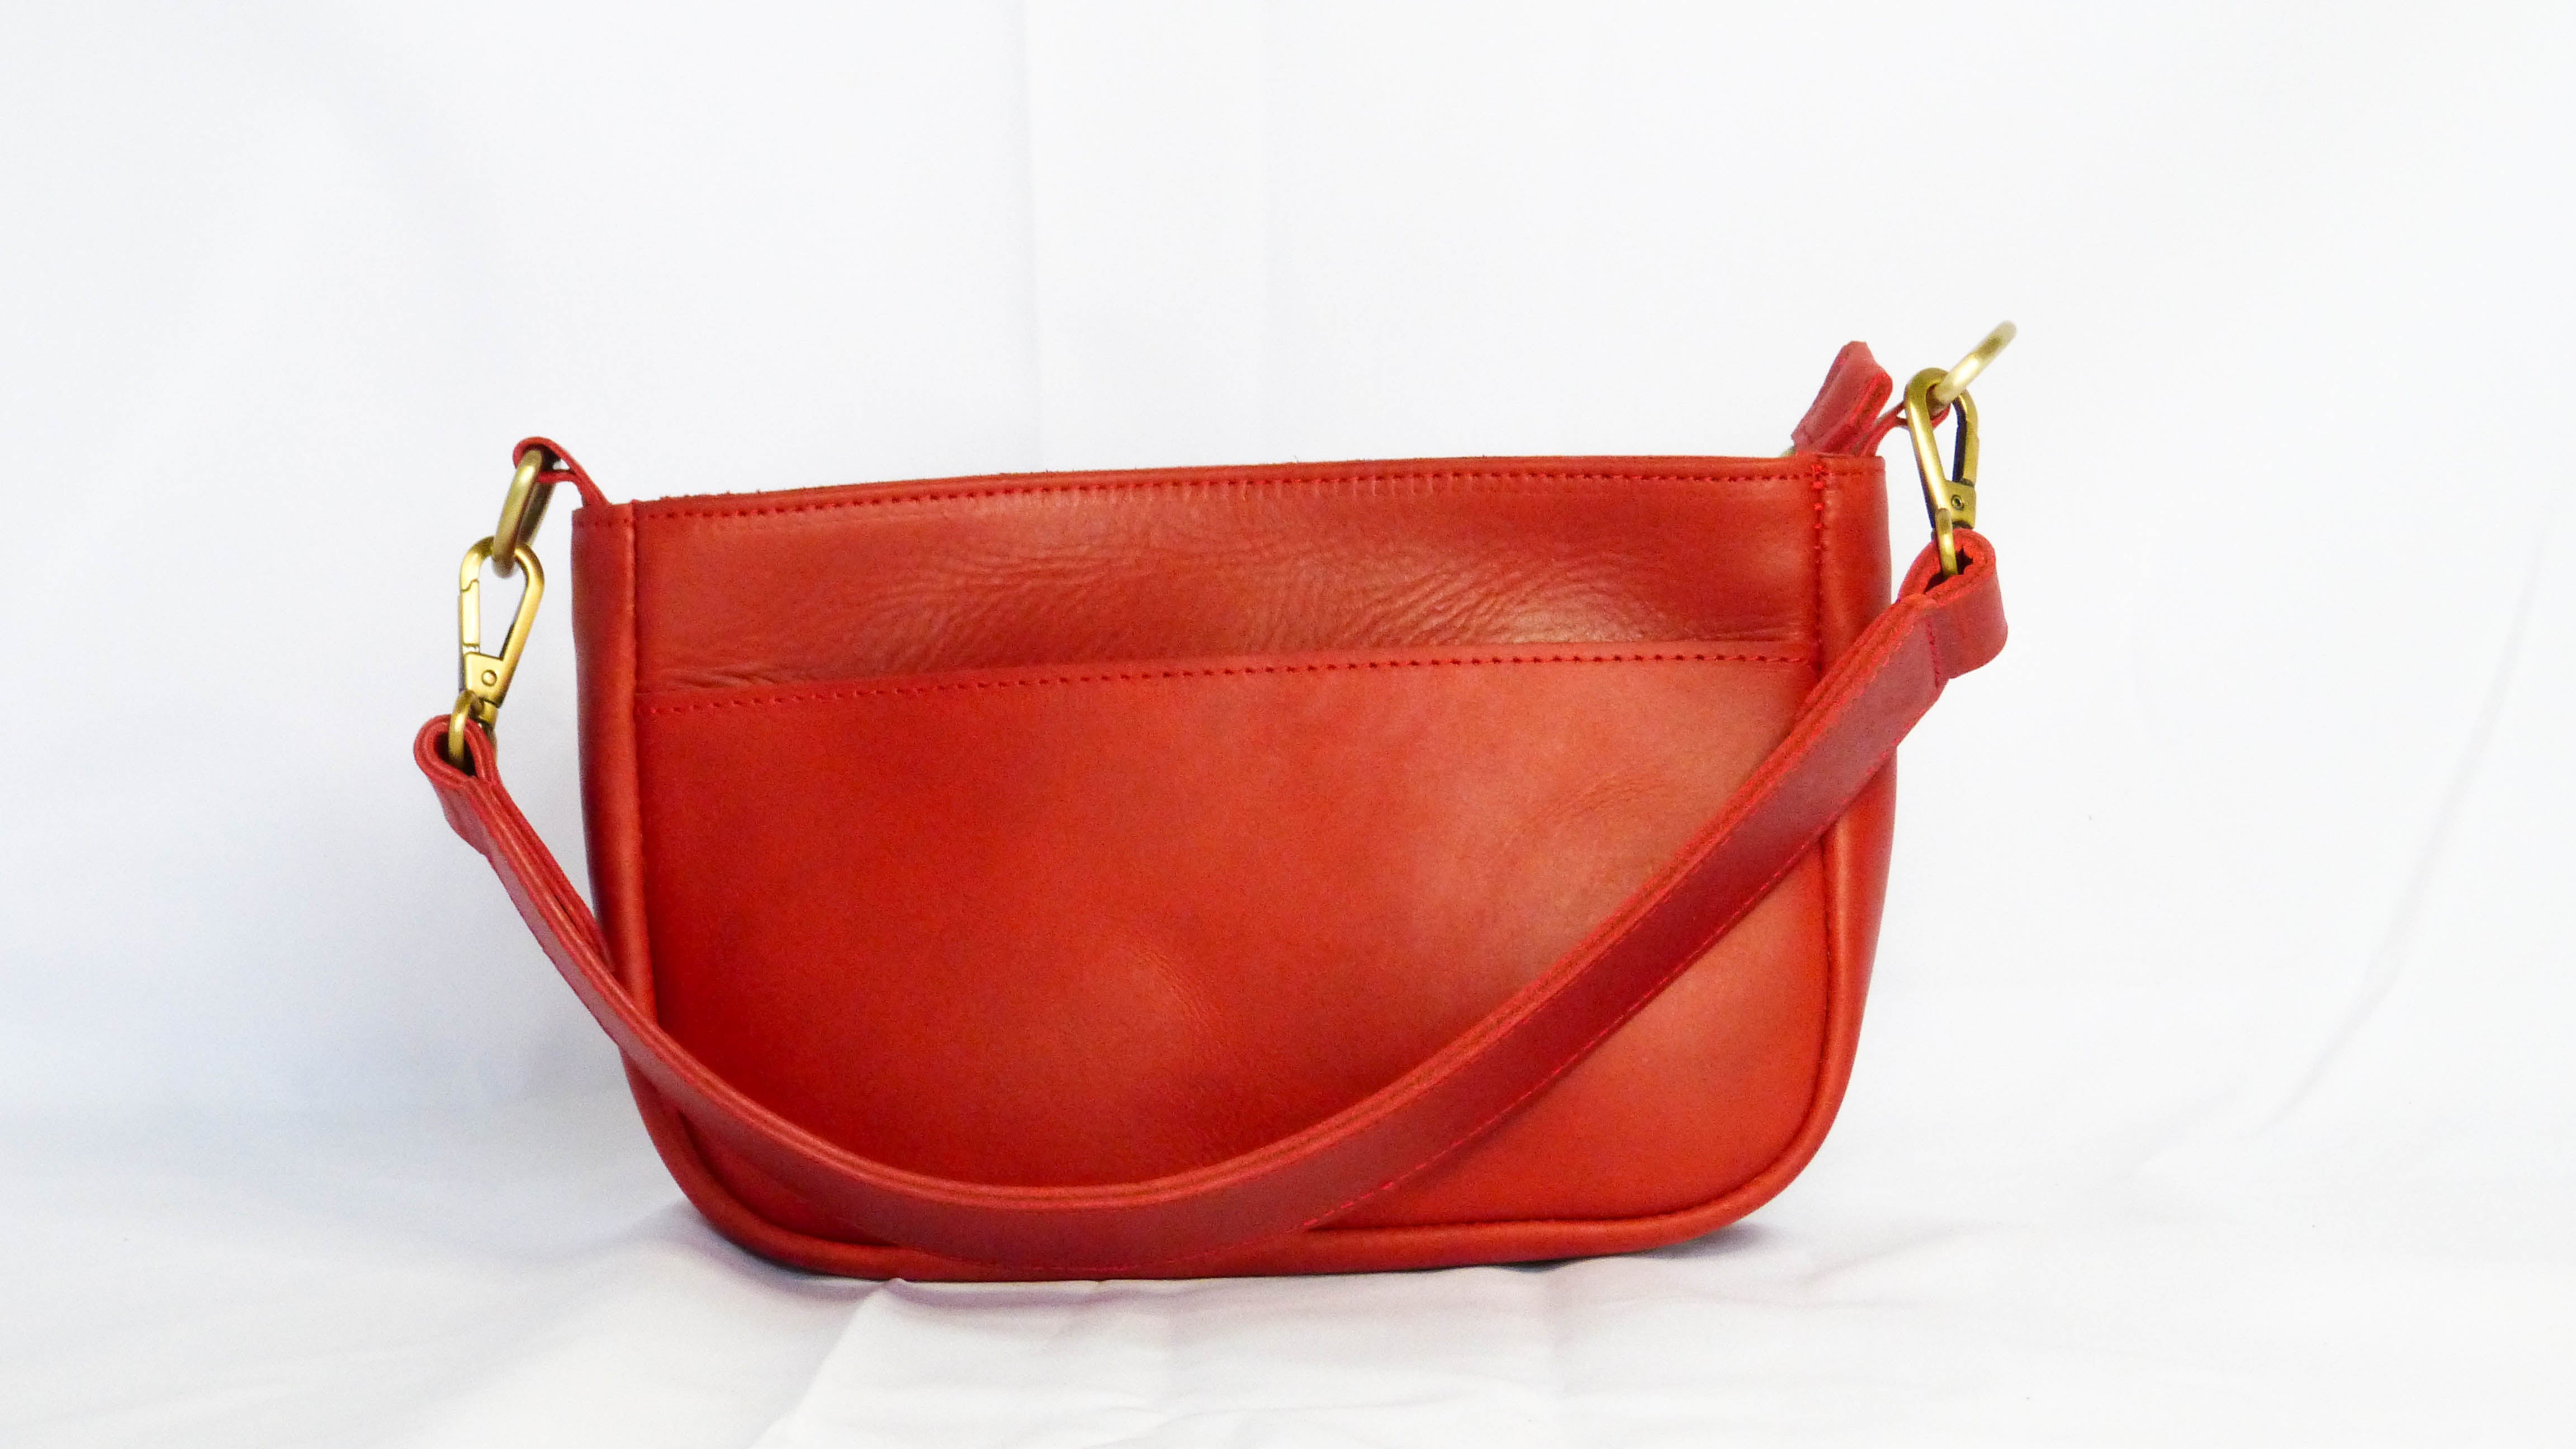 A red leather Jessica purse with removable shoulder strap, zippered top, inside pocket, and outside phone pocket. Handmade by Ethiopian artisans for Madeline Parks Designs.